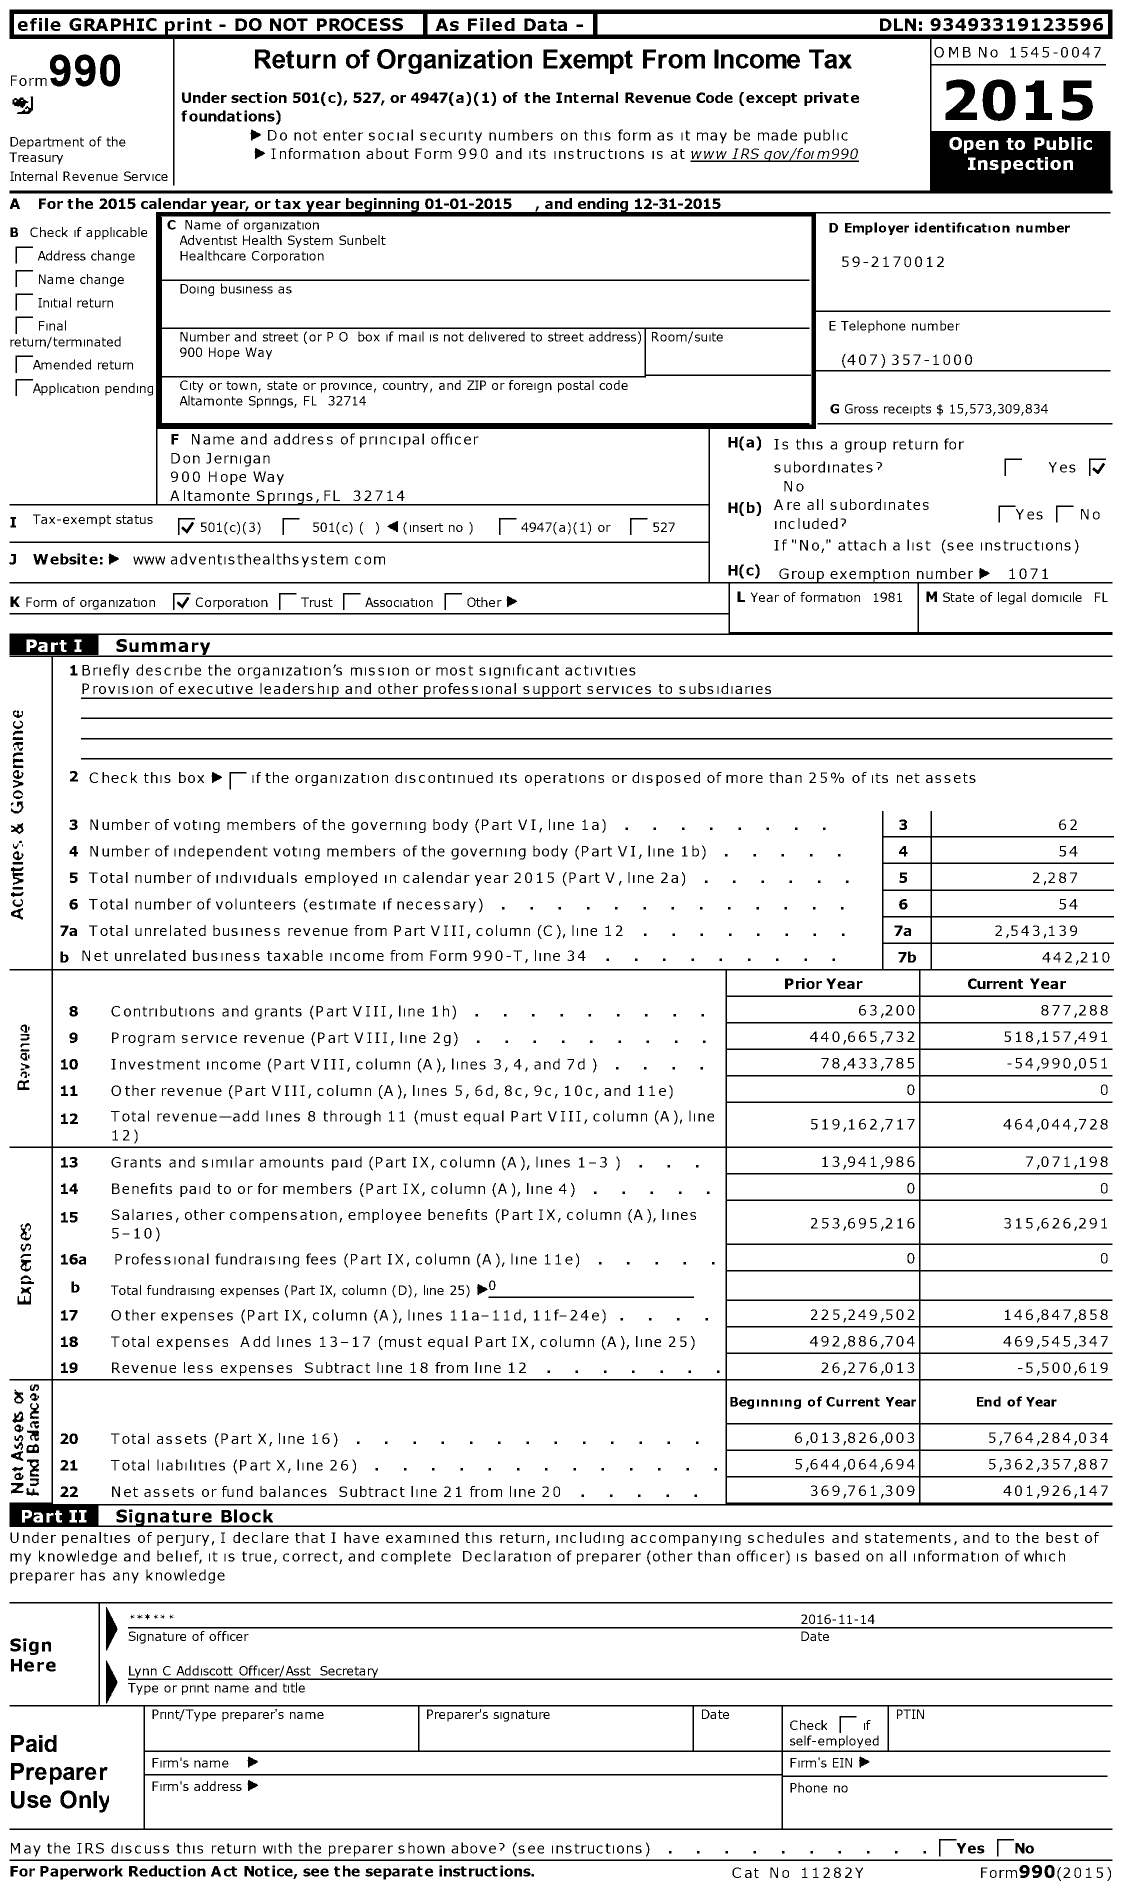 Image of first page of 2015 Form 990 for Adventist Health System Sunbelt Healthcare Corporation